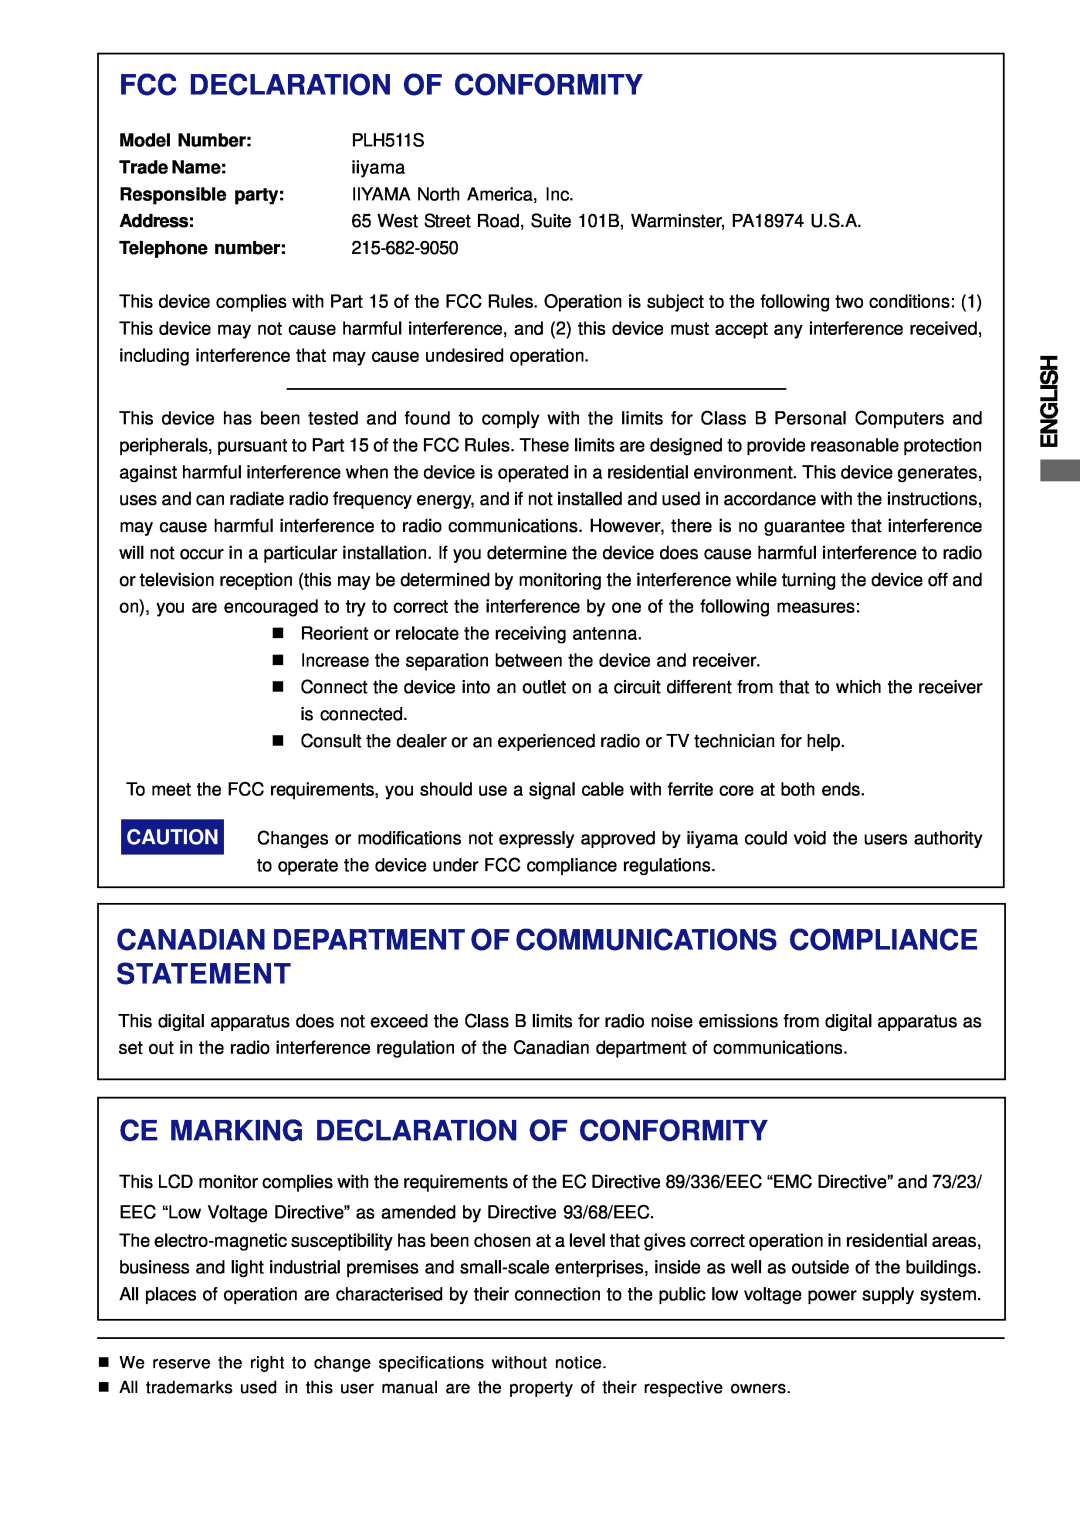 Iiyama Fcc Declaration Of Conformity, Canadian Department Of Communications Compliance Statement, English, PLH511S 